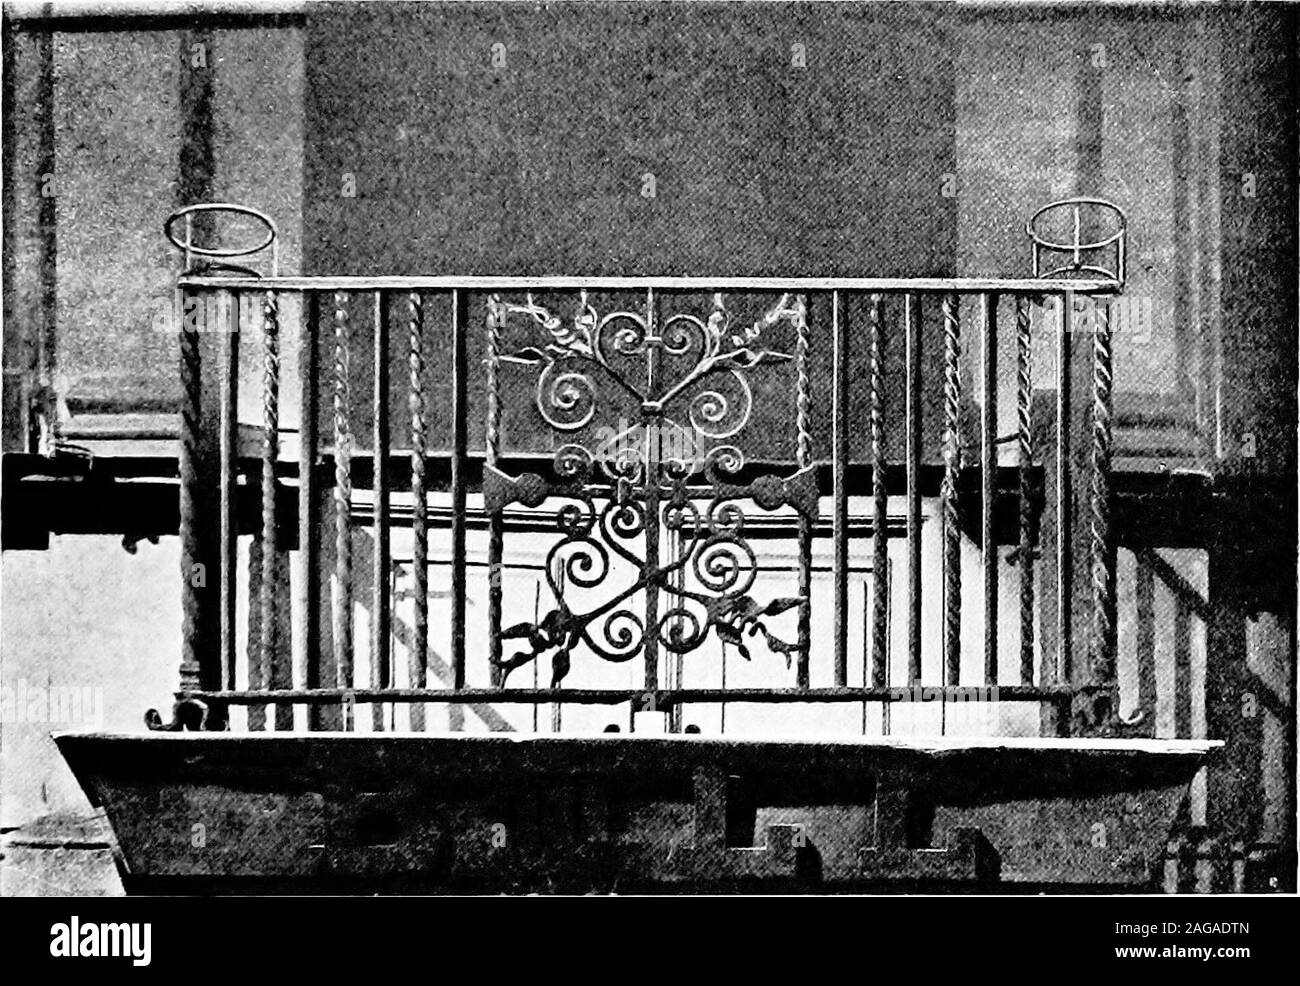 . English ironwork of the XVIIth & XVIIIth centuries; an historical & analytical account of the development of exterior smithcraft. FIG. 97. TOWN HALL, WALLINGFORD. Balconies 257 repeats the twisted verticals and extra standards with ball finials andthree scrolled panels in front, more or less restored. Those atGuildford, dating from 1683, are finer. In the large balcony to theTown Hall the vertical bars are alternately plain and twisted,and the standards twisted and surmounted by faceted balls, witha central panel, the scrolls terminating in thistles, repeating fourways with simpler and corre Stock Photo